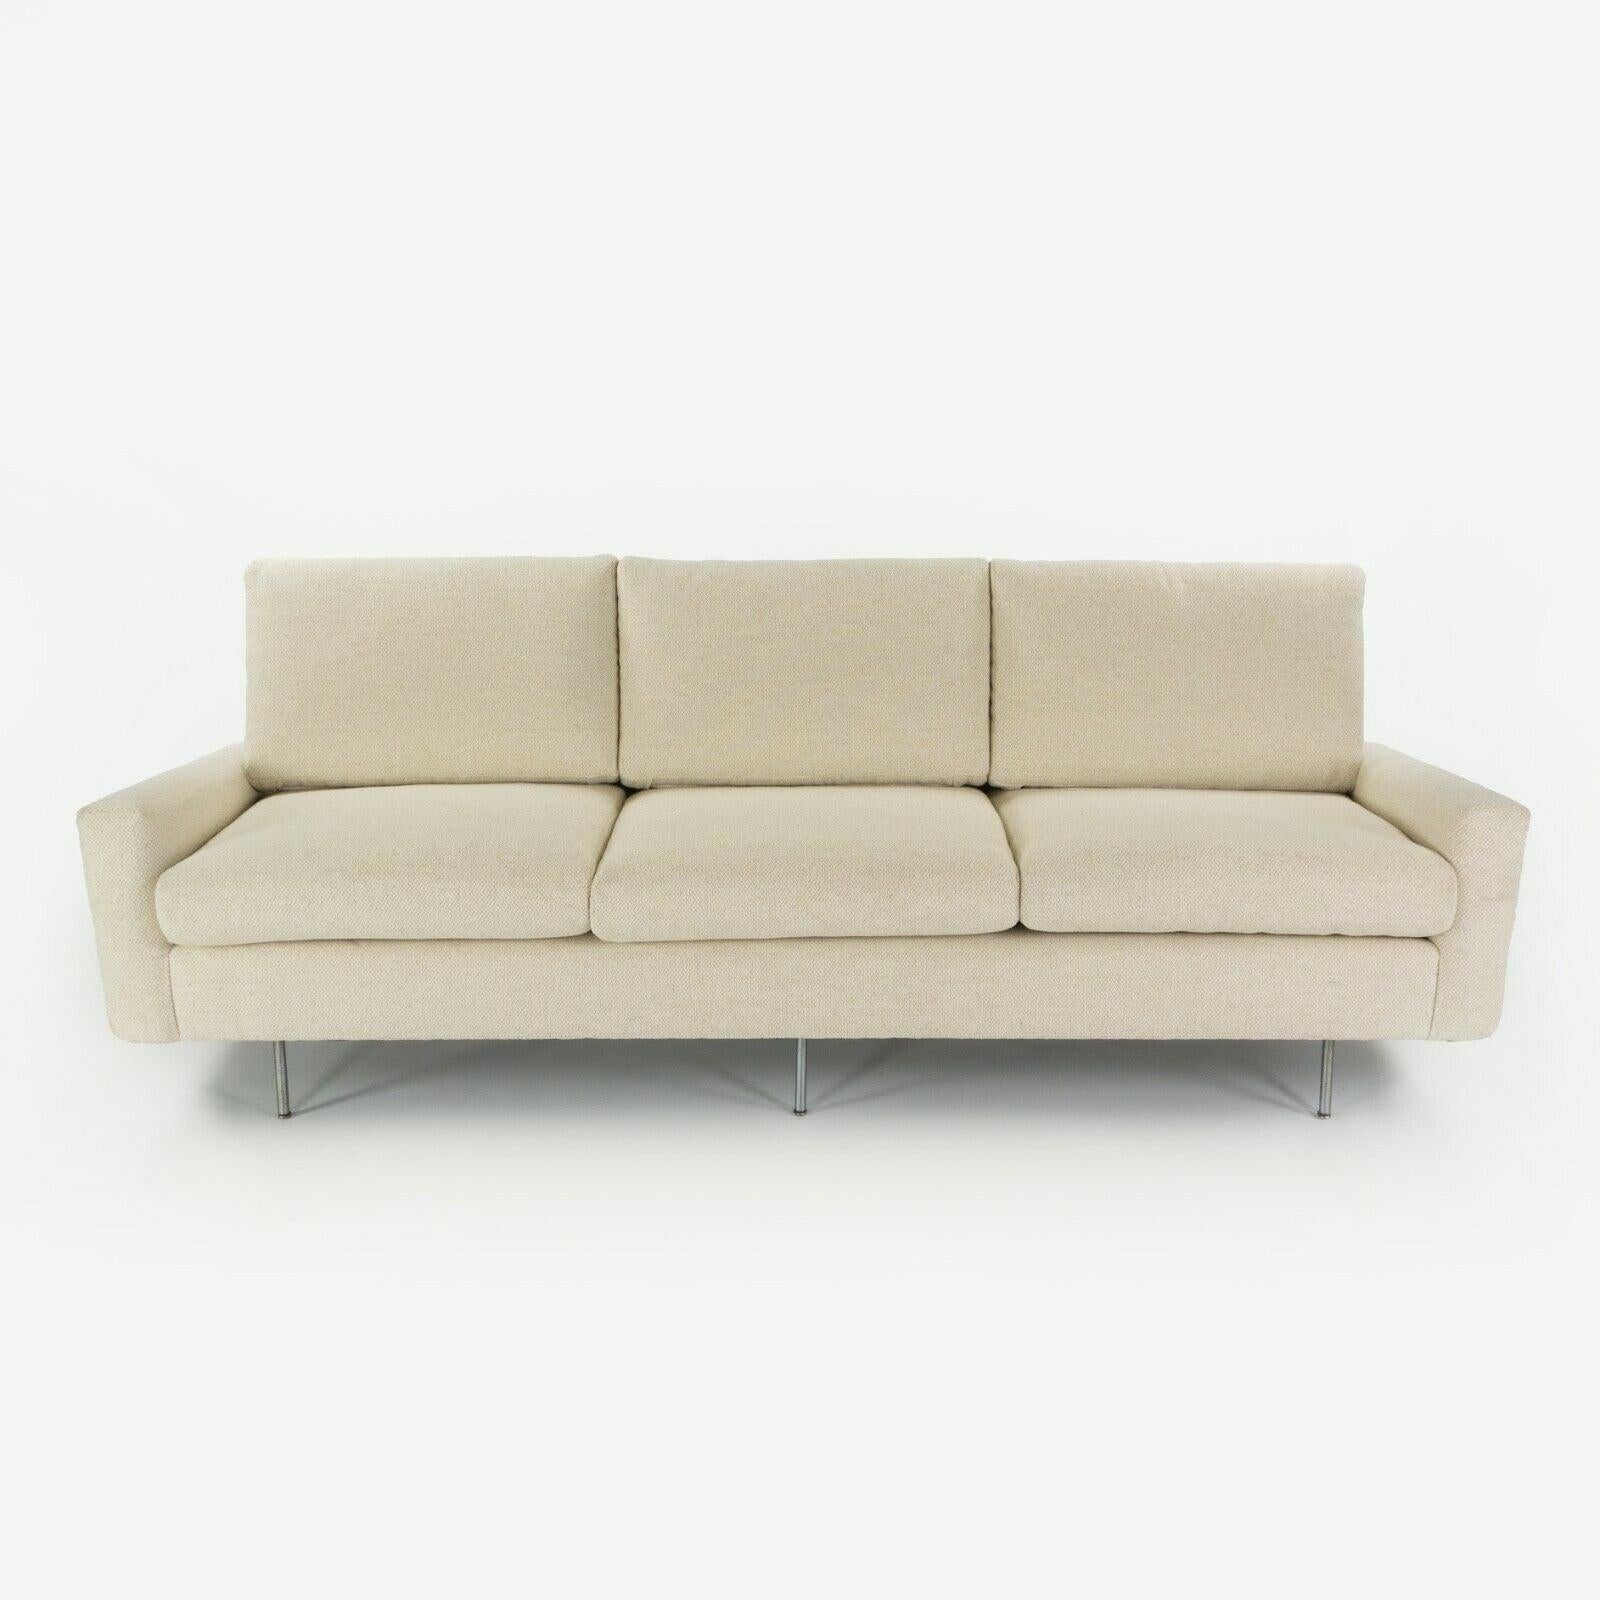 1949 Florence Knoll Associates 26 BC Upholstered 3-Seater Sofa New Upholstery For Sale